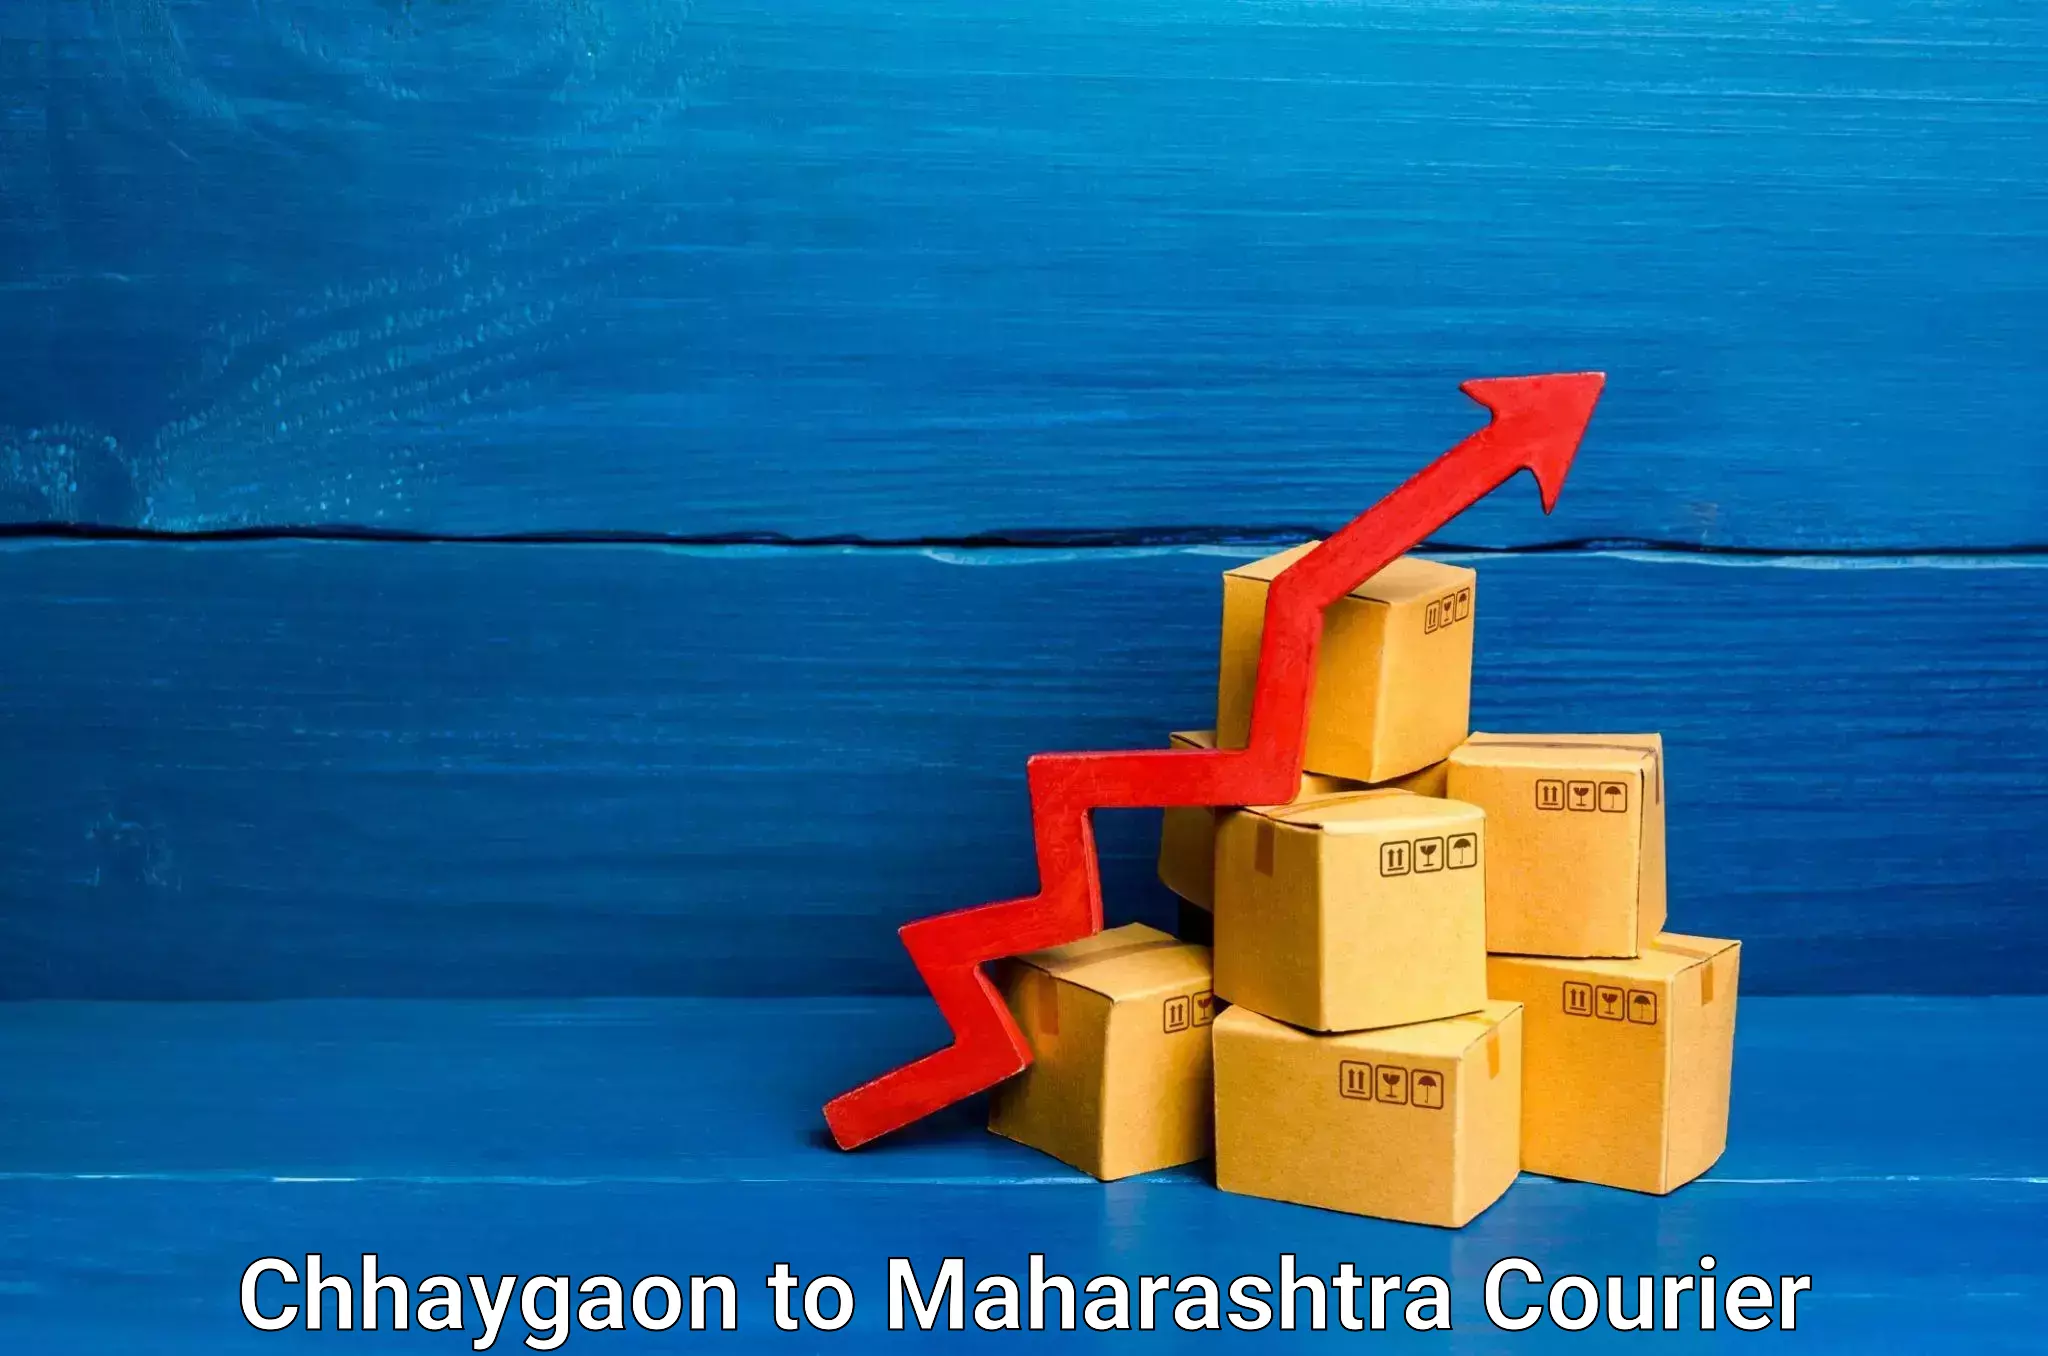 Courier service booking Chhaygaon to Pimpri Chinchwad